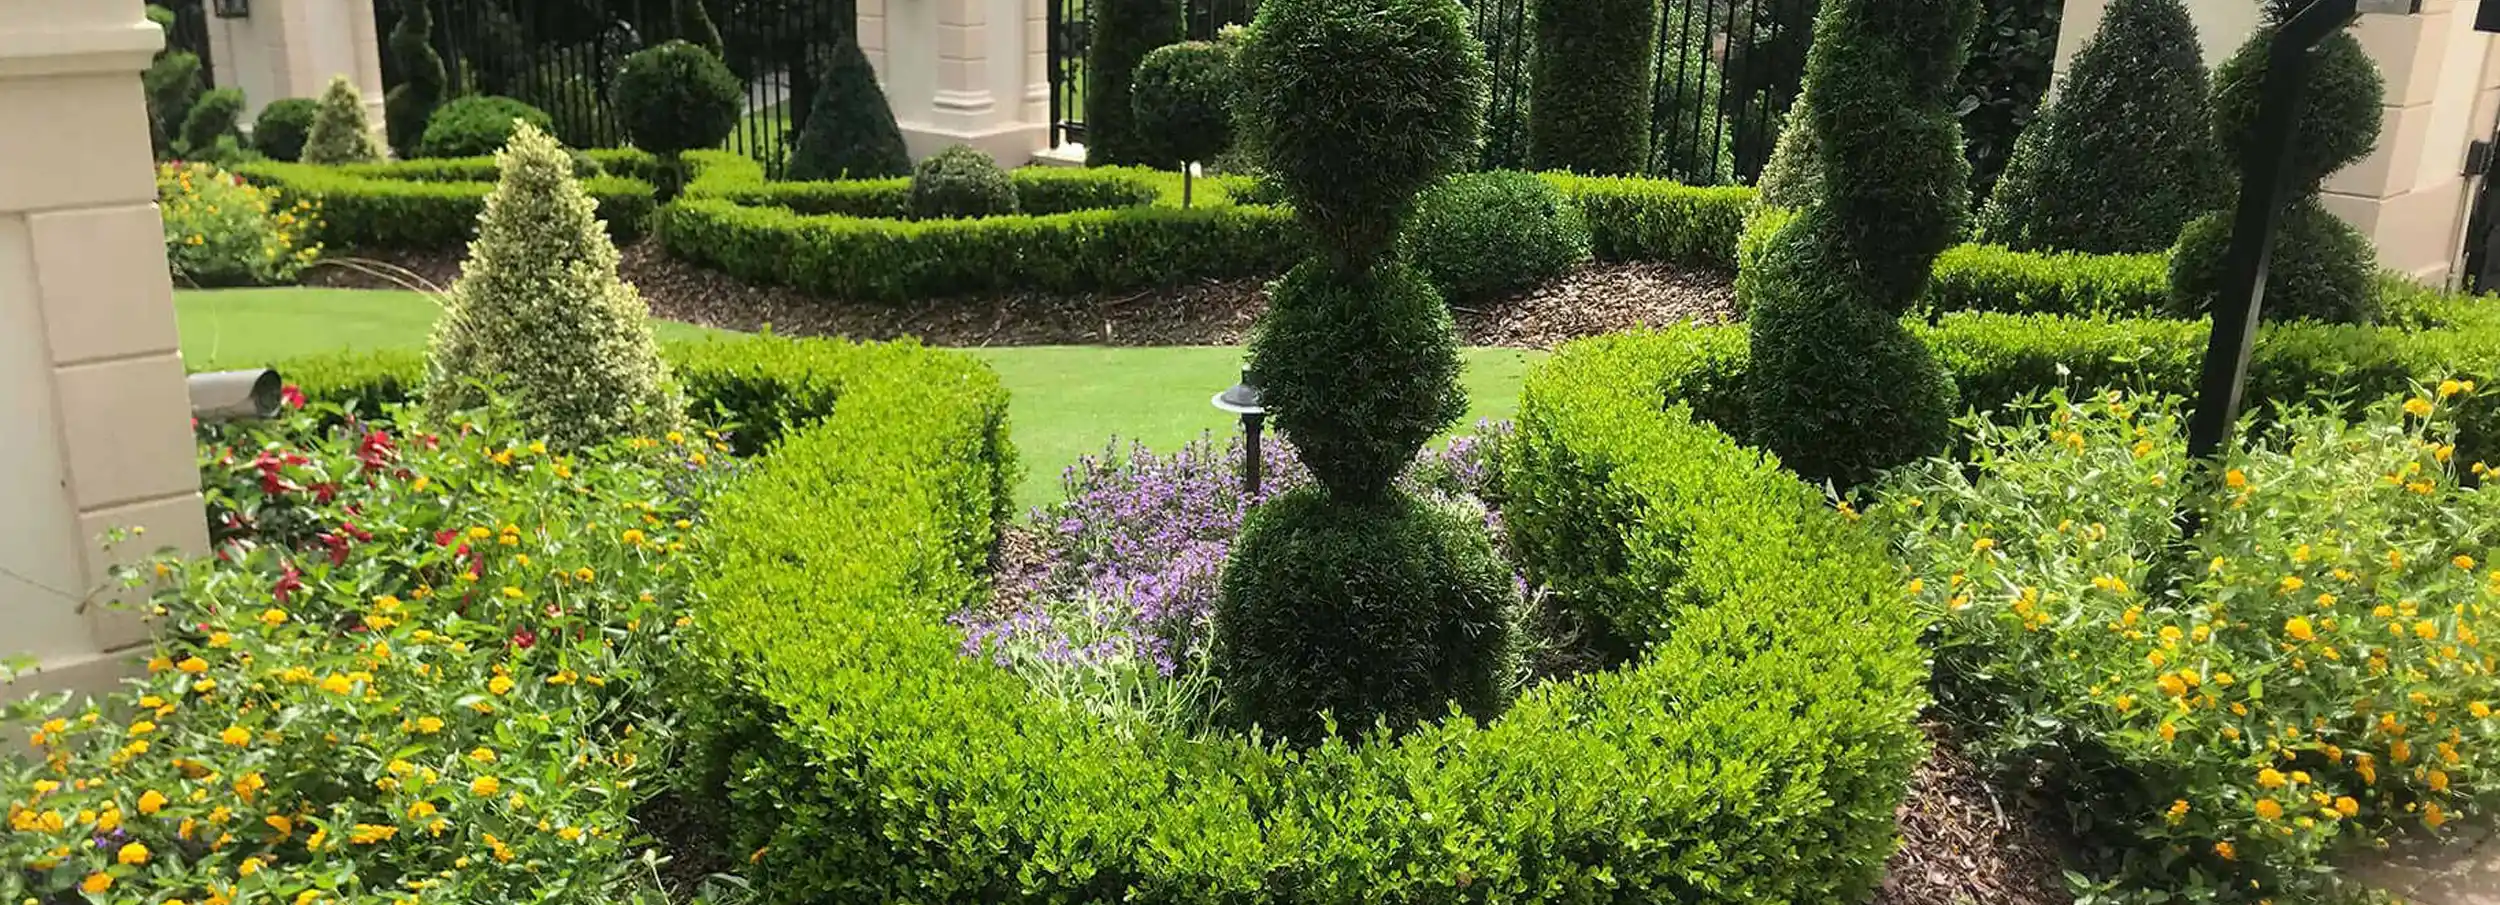 A courtyard with a well-manicured lawn, tall topiaries, hedges, and flowers.